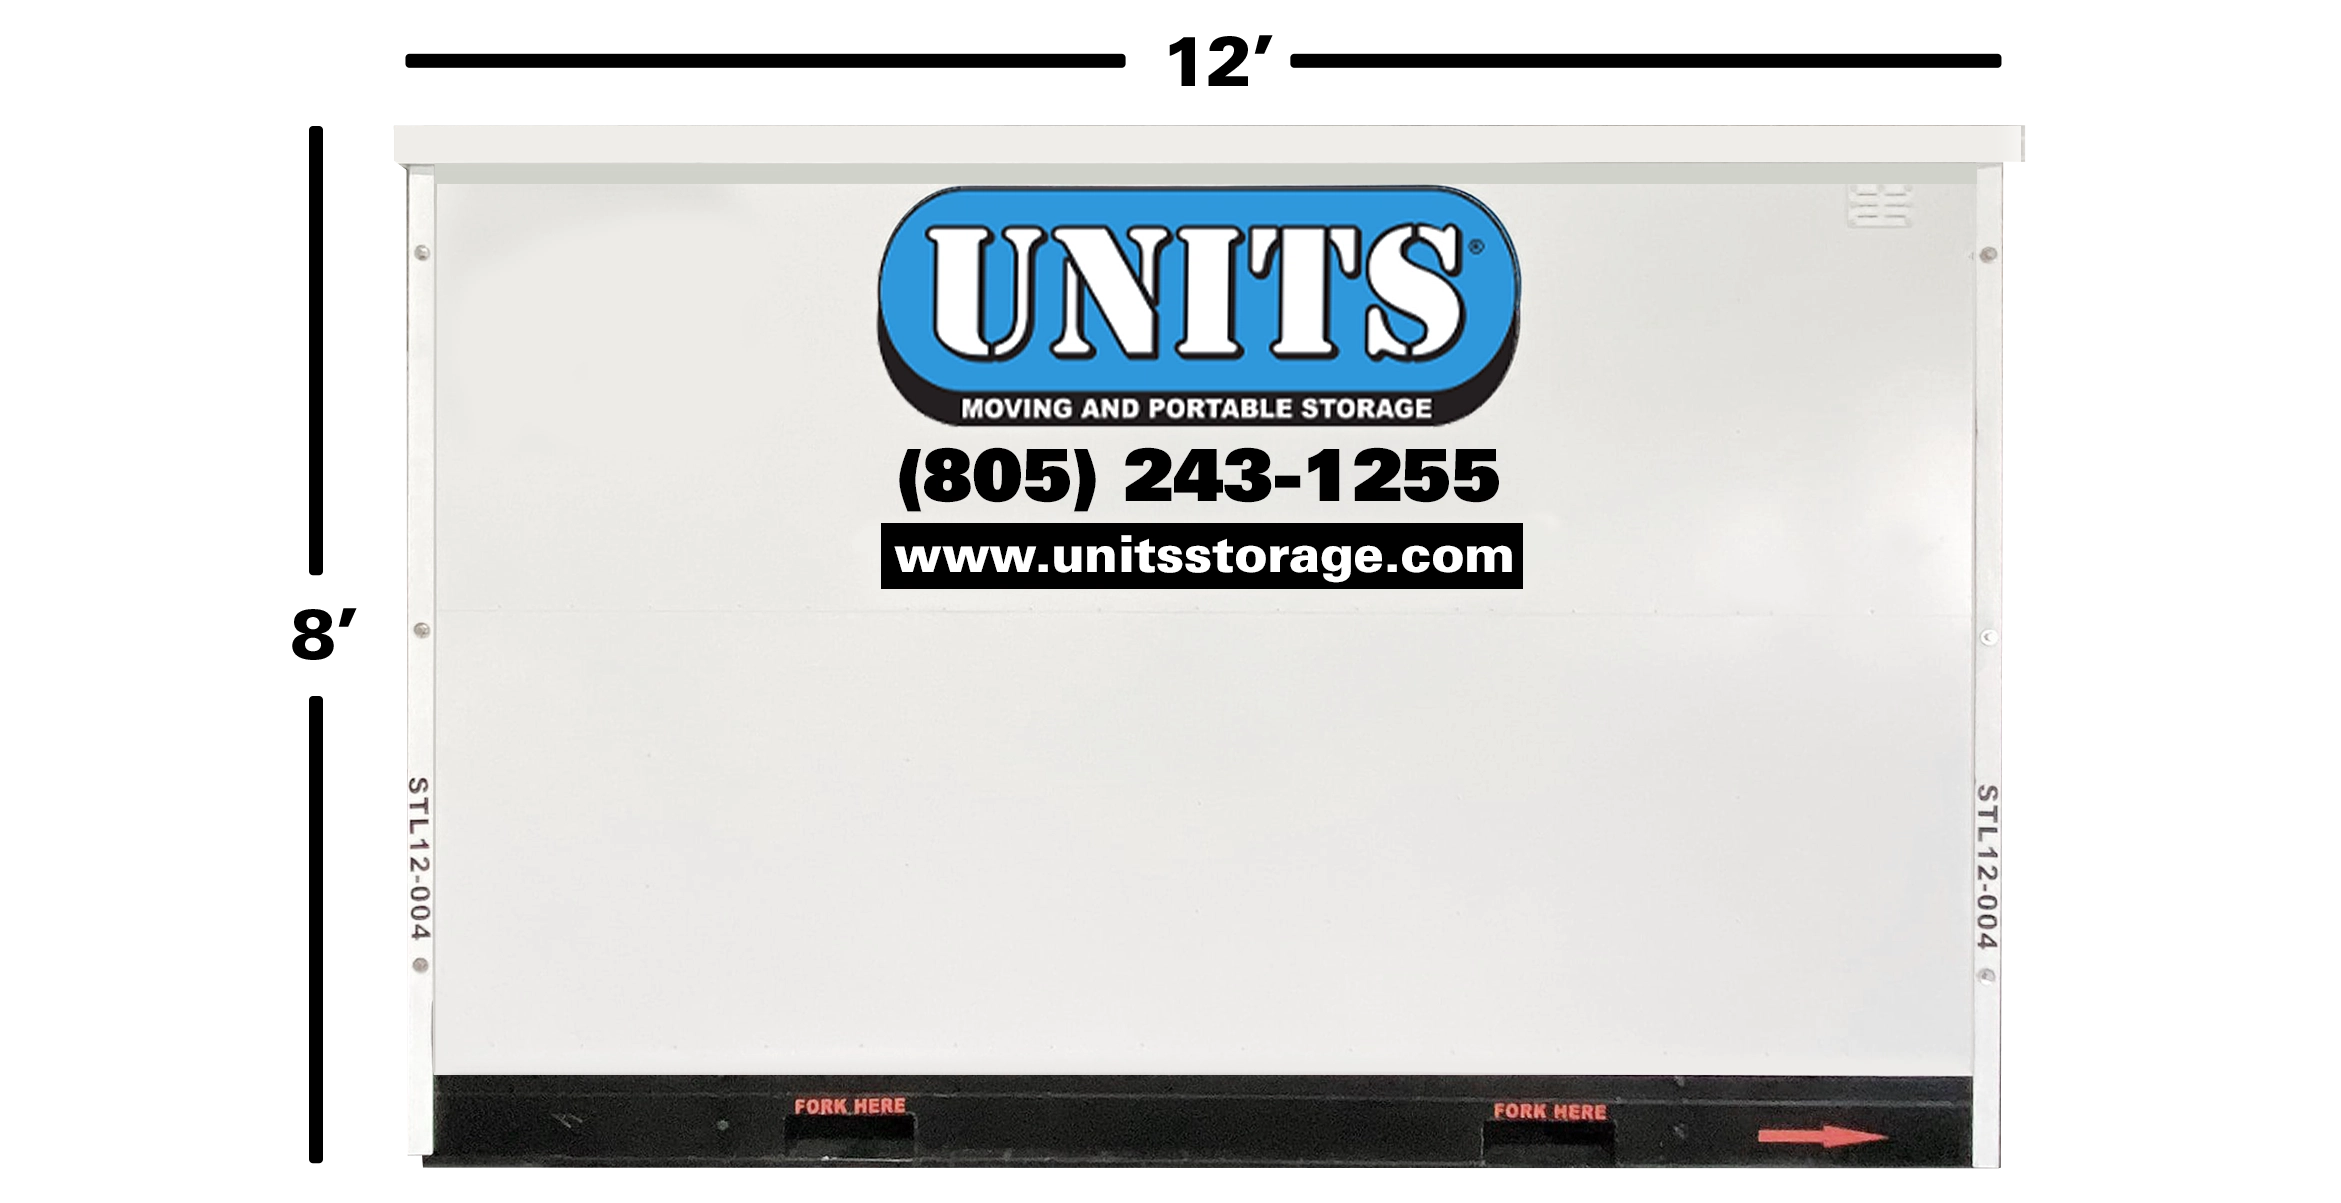 UNITS Moving and Portable Storage of Northeast Ohio, Cleveland and Akron Logo